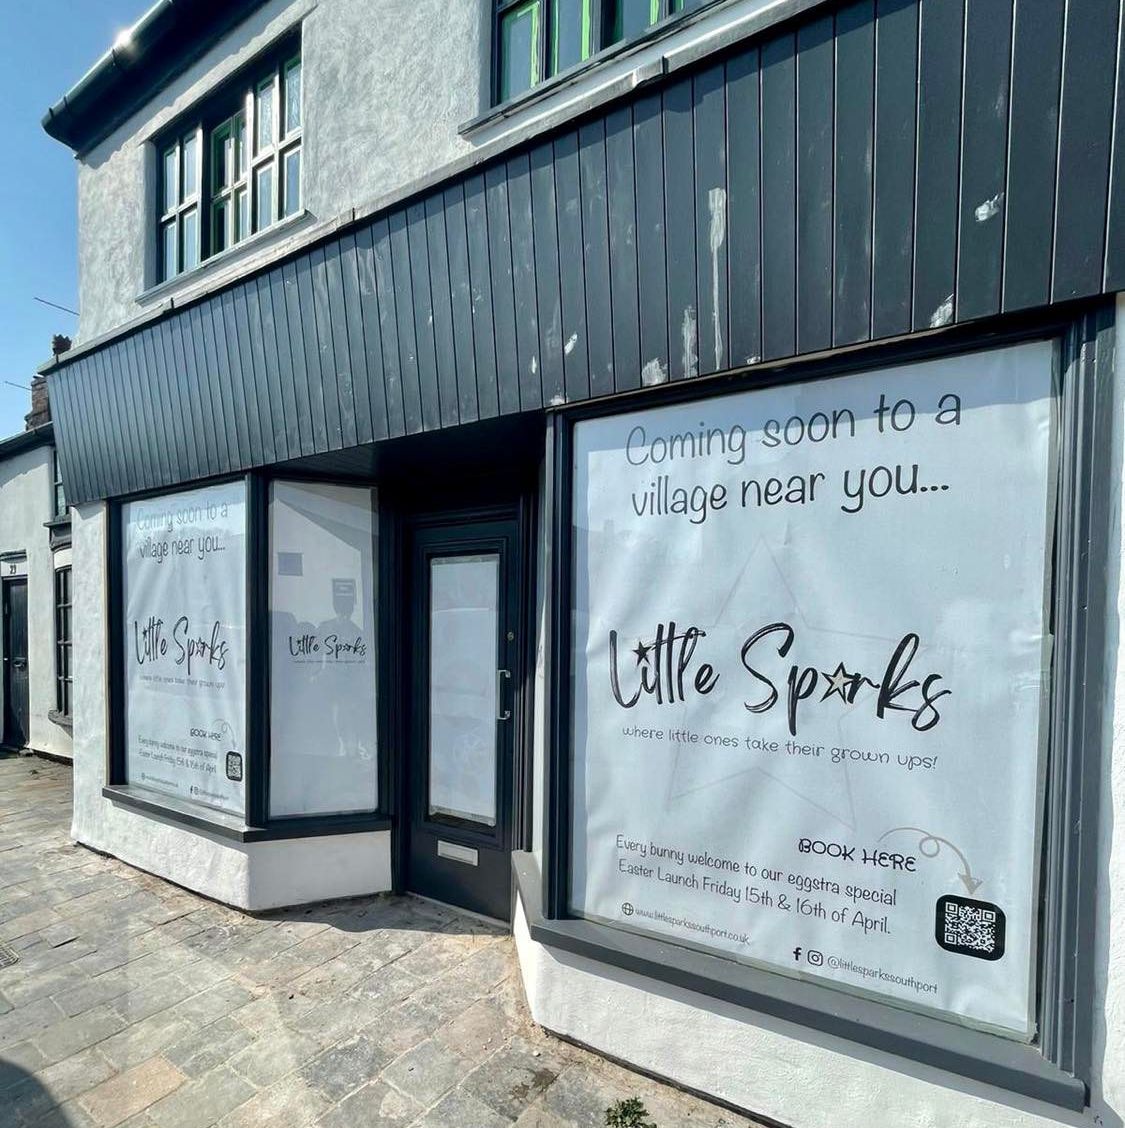 Little Sparks is opening in Churchtown in Southport